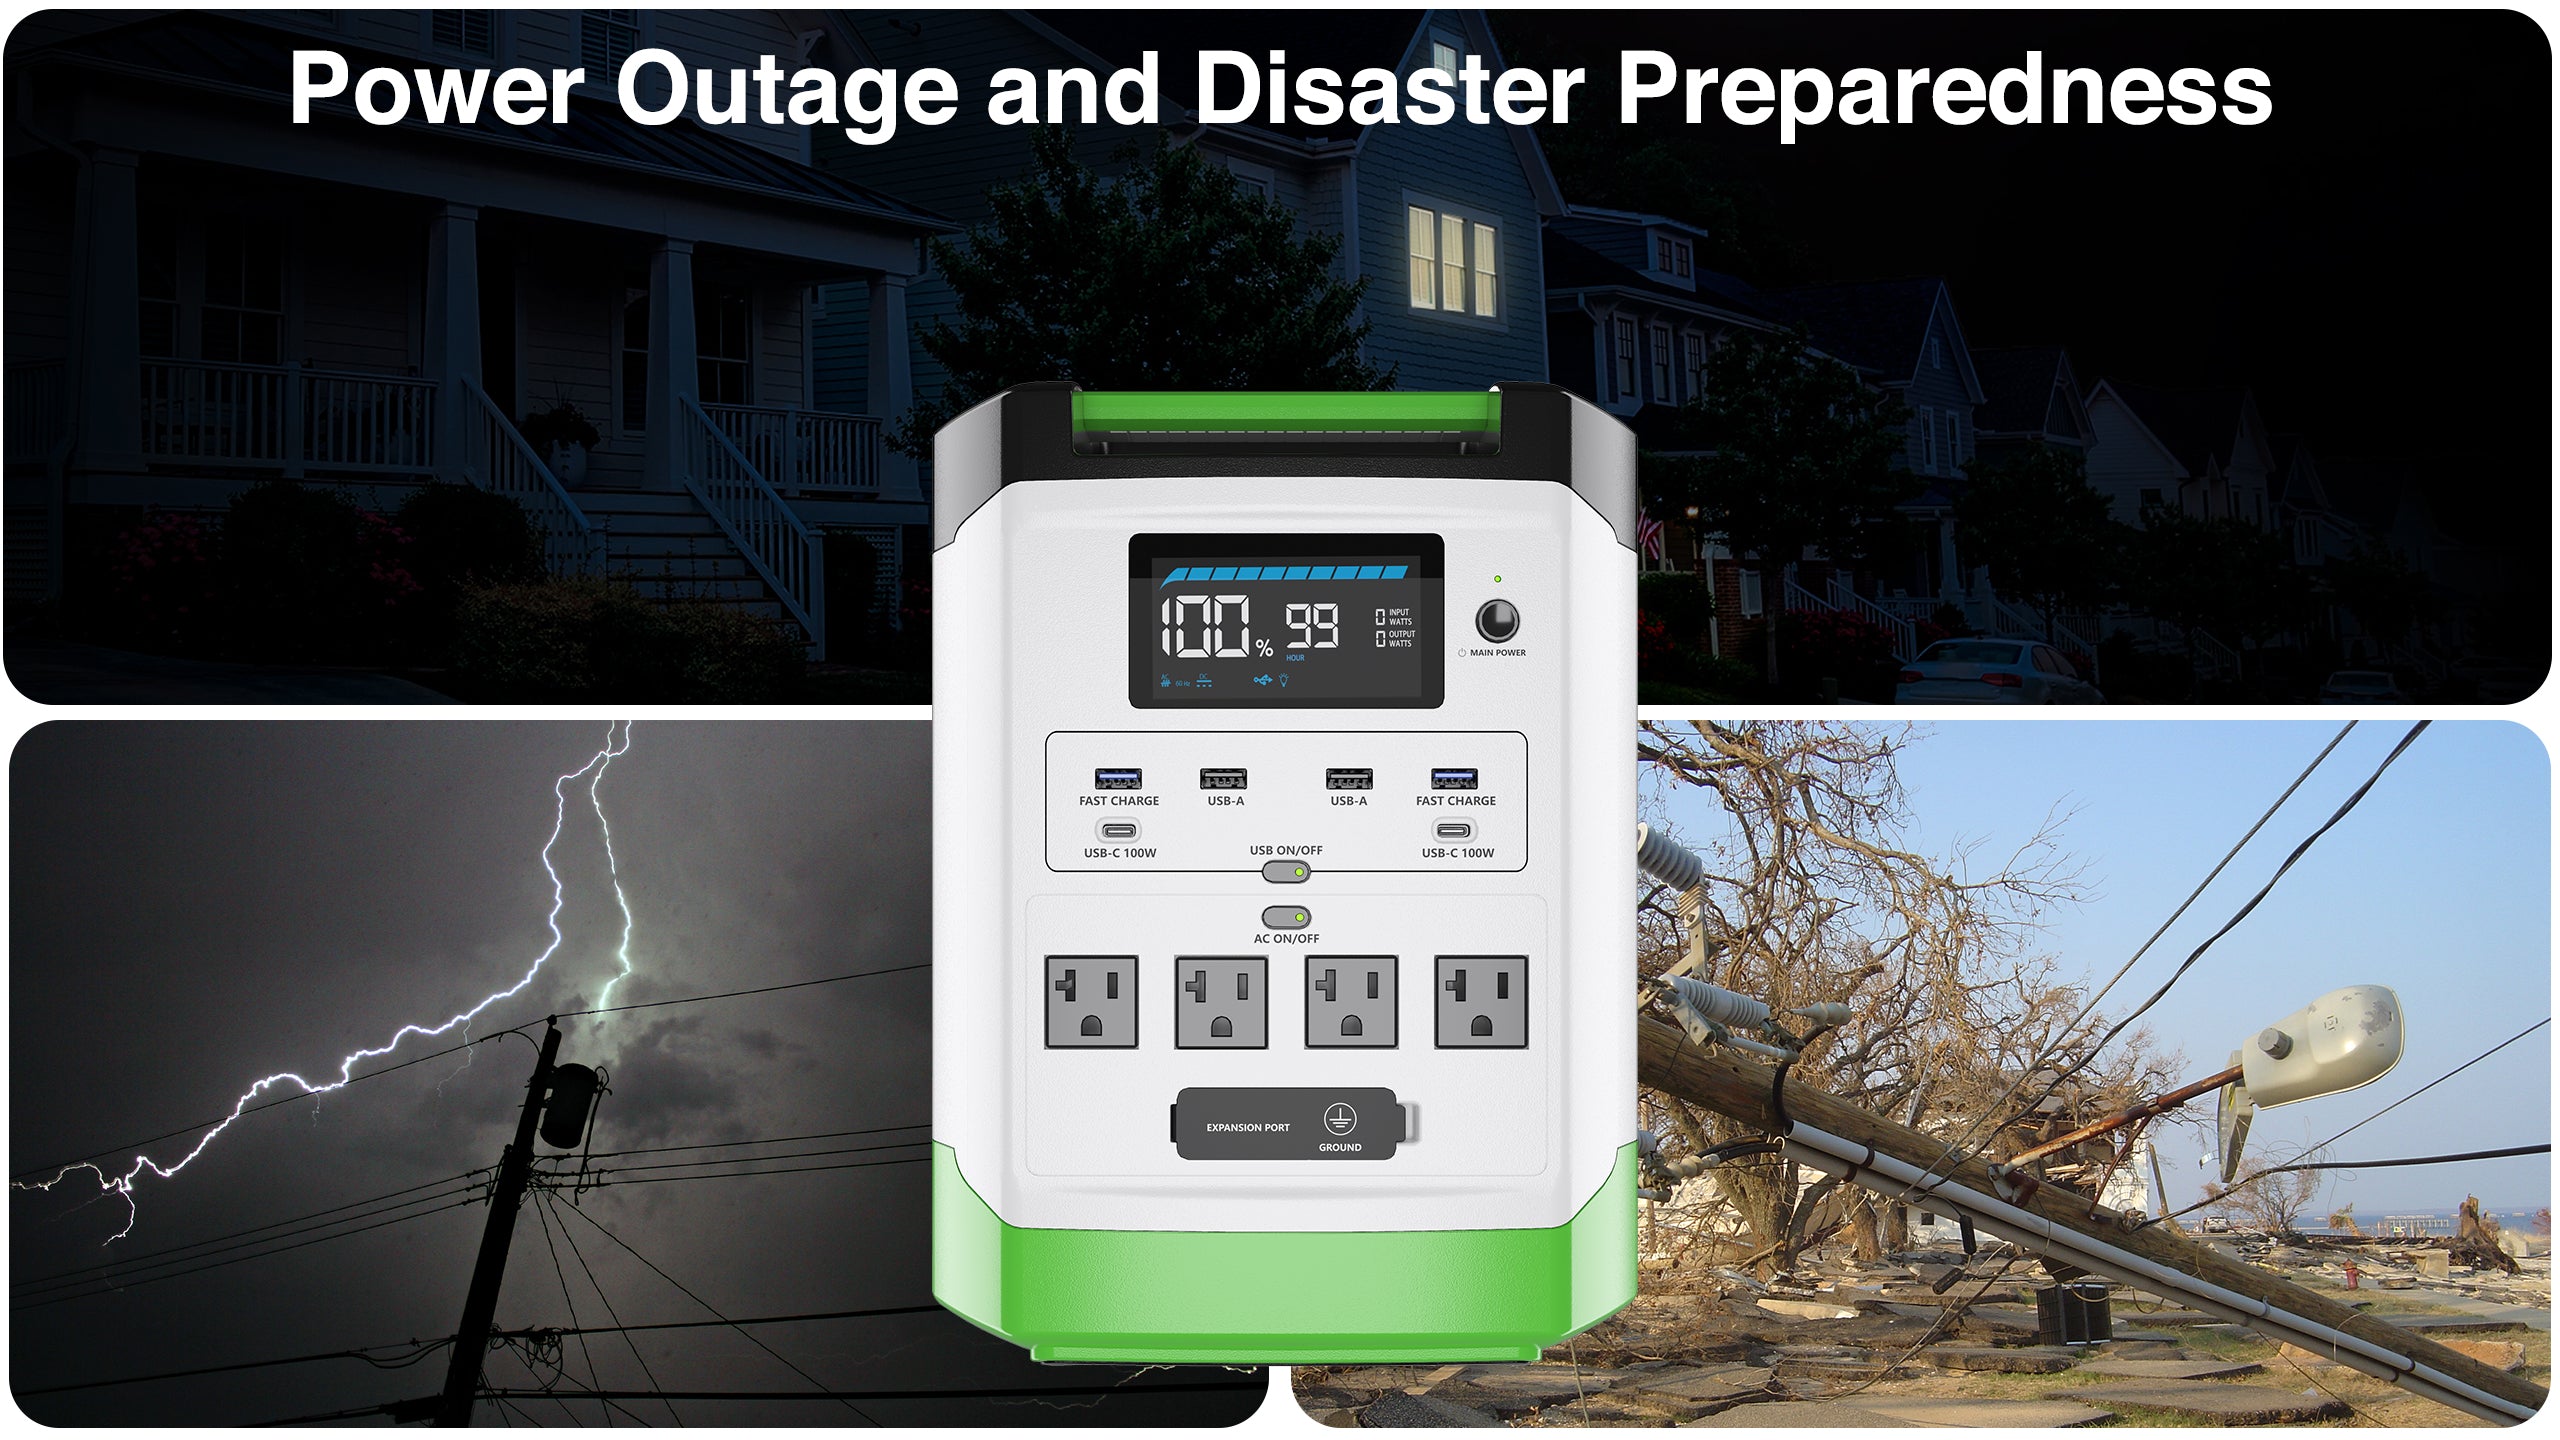 Power_Outage_and_Disaster_Preparedness.jpg__PID:e8f83f58-3d48-4fa4-9e8f-84fabd4a00d1